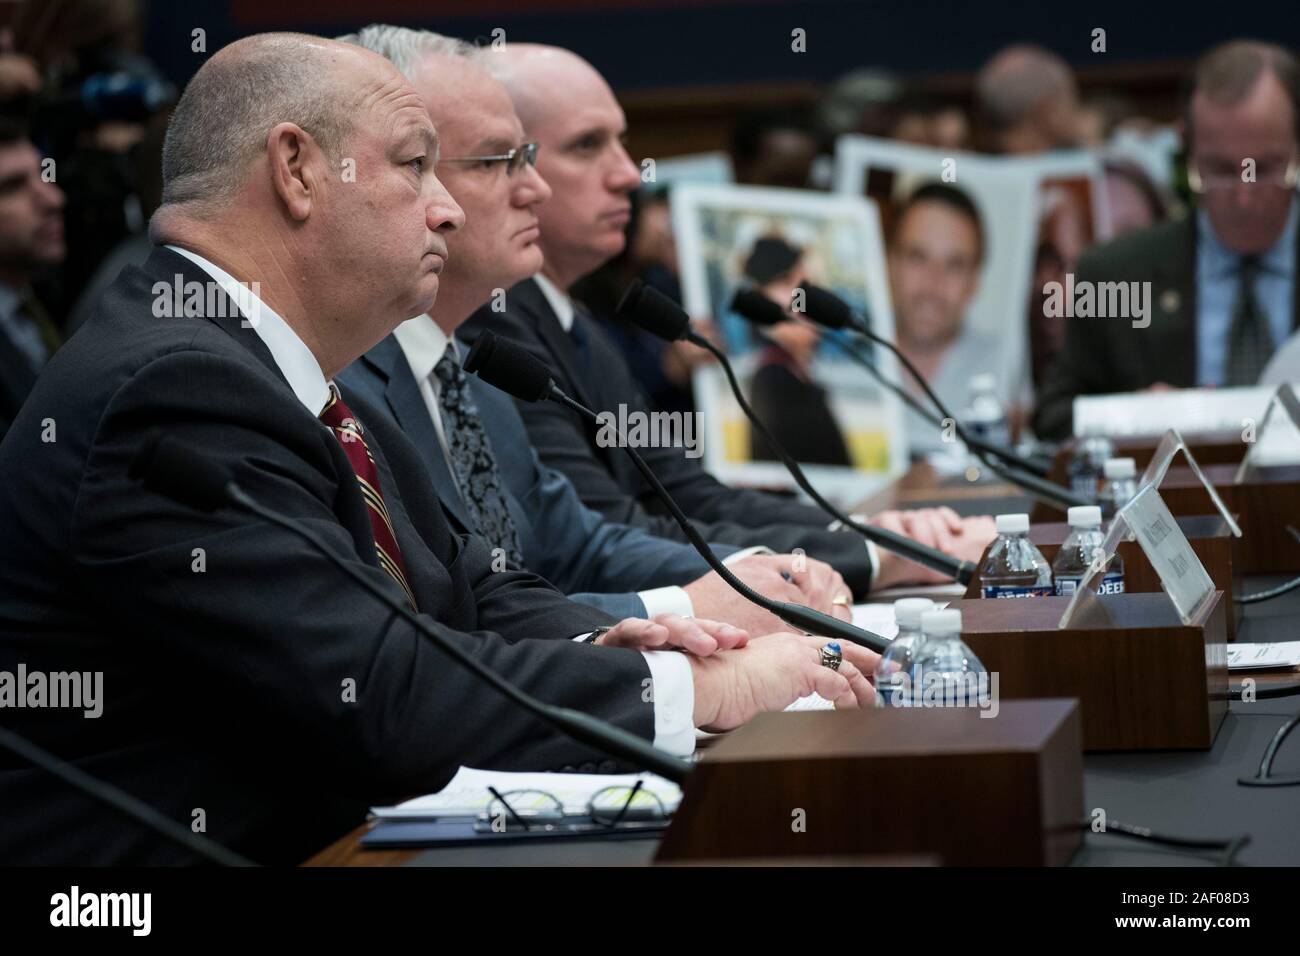 Washington, USA. 11th Dec, 2019. Steve Dickson (1st L, Front), chief of the Federal Aviation Administration (FAA), testifies before the House Committee on Transportation and Infrastructure during a hearing on 'The Boeing 737 MAX: Examining the Federal Aviation Administration's Oversight of the Aircraft's Certification' in Washington, DC, the United States, on Dec. 11, 2019. Steve Dickson said Wednesday that aviation regulators won't likely clear Boeing's troubled 737 Max airplanes for flight until 2020. Credit: Sarah Silbiger/Xinhua/Alamy Live News Stock Photo